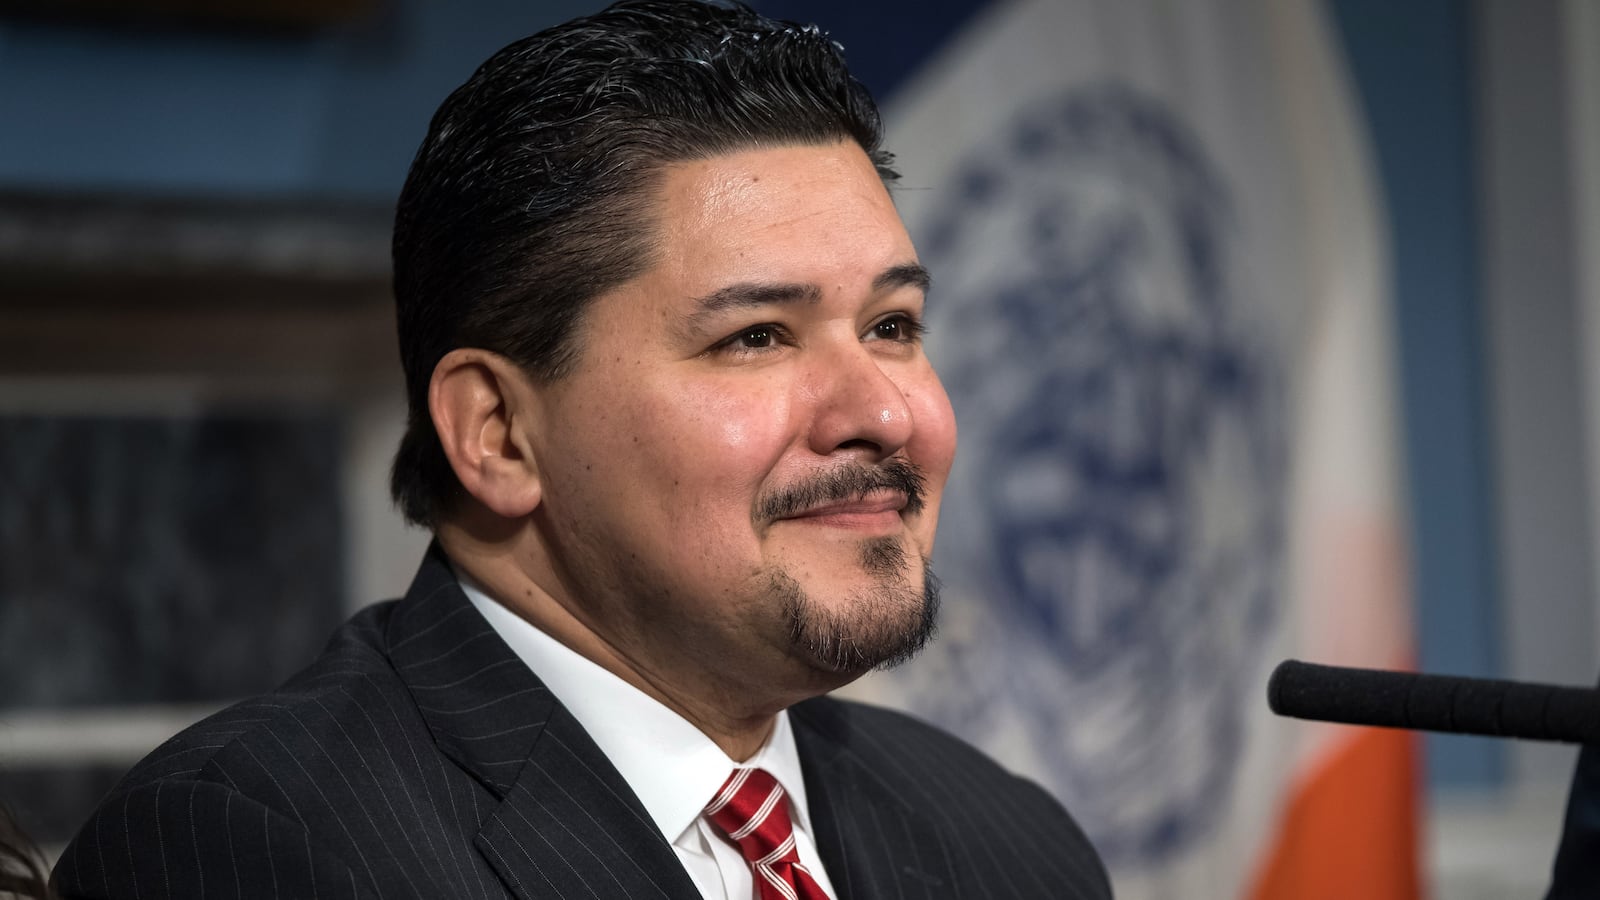 Advocates for culturally relevant education practices hope Richard Carranza will support their efforts.